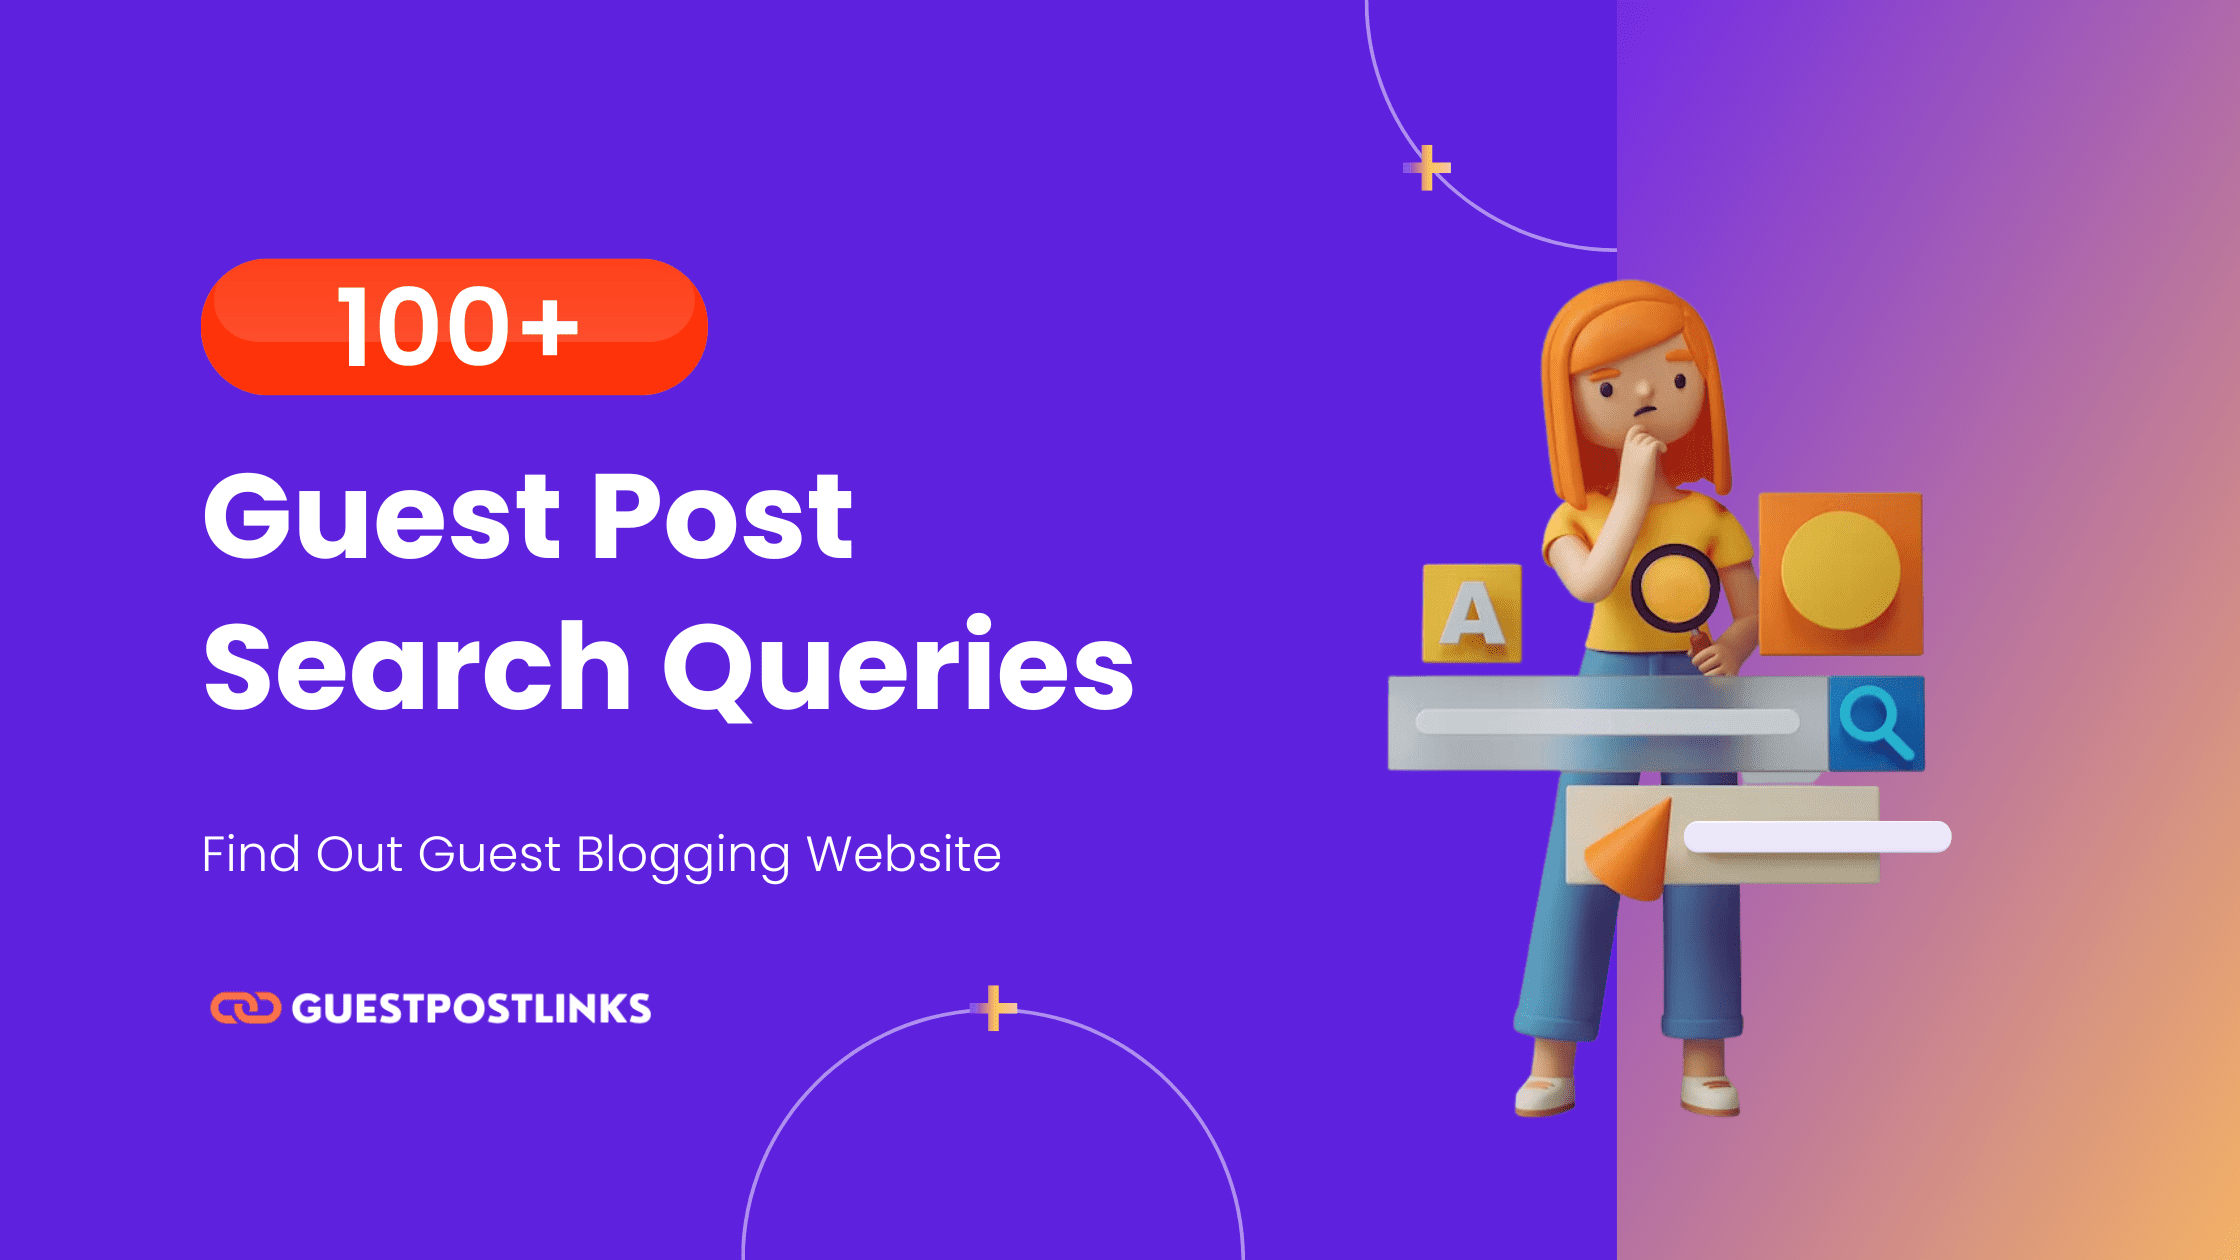 Guest Post Search Queries